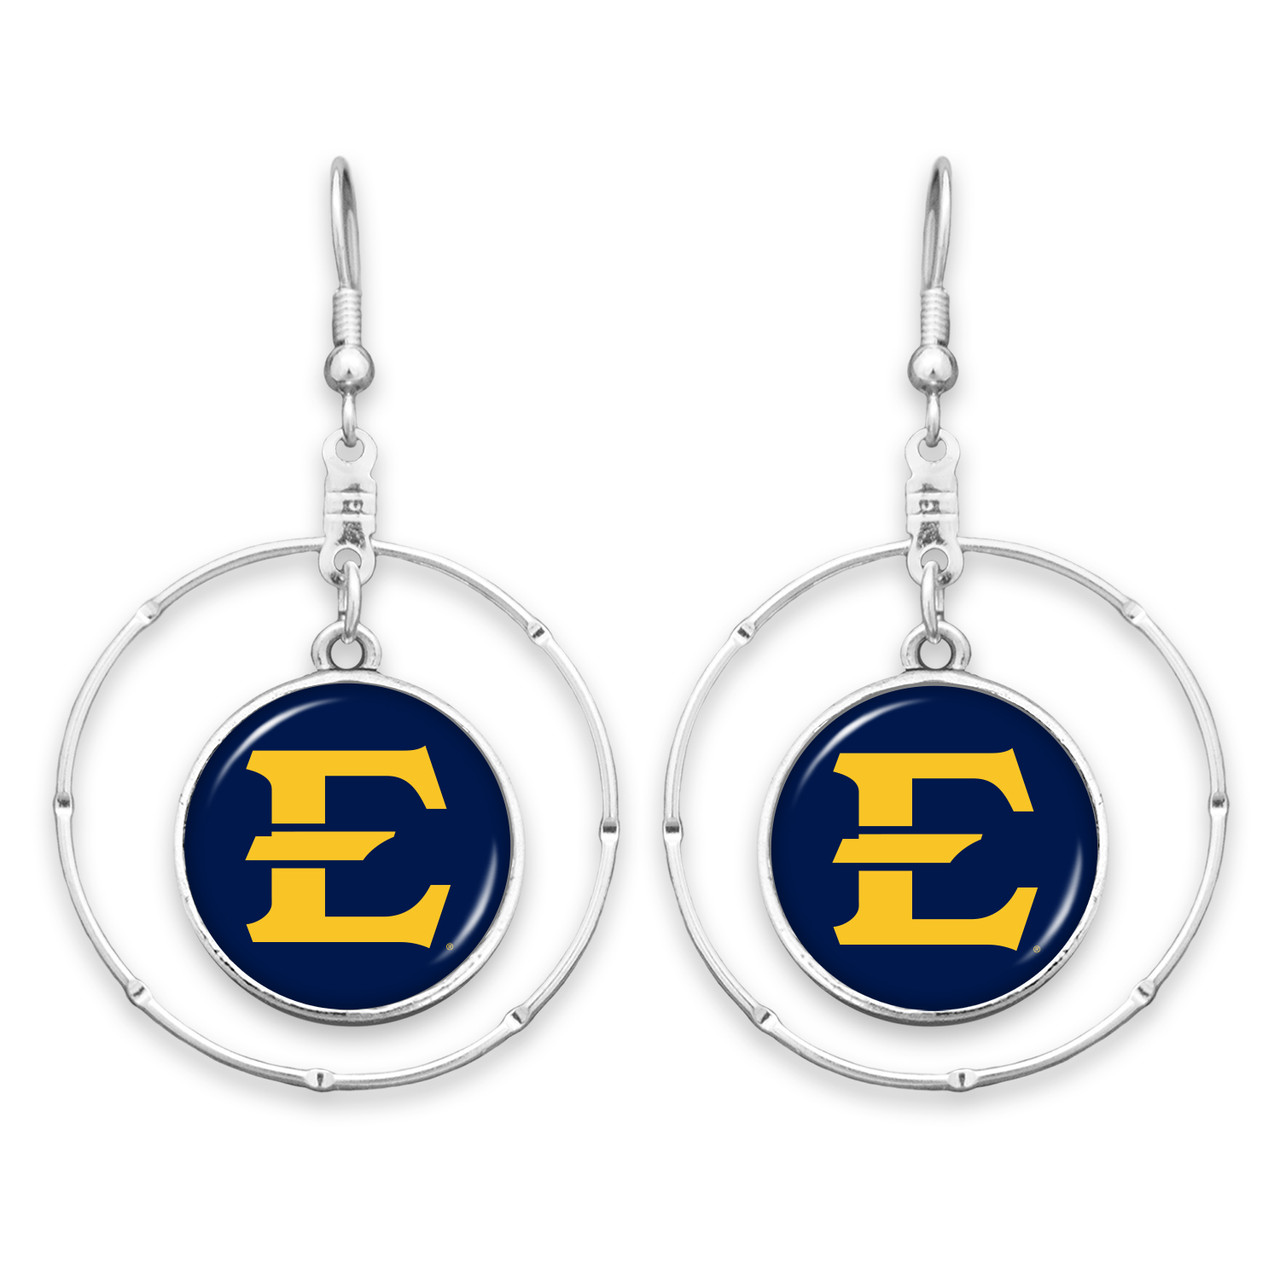 East Tennessee State Buccaneers Earrings- Campus Chic